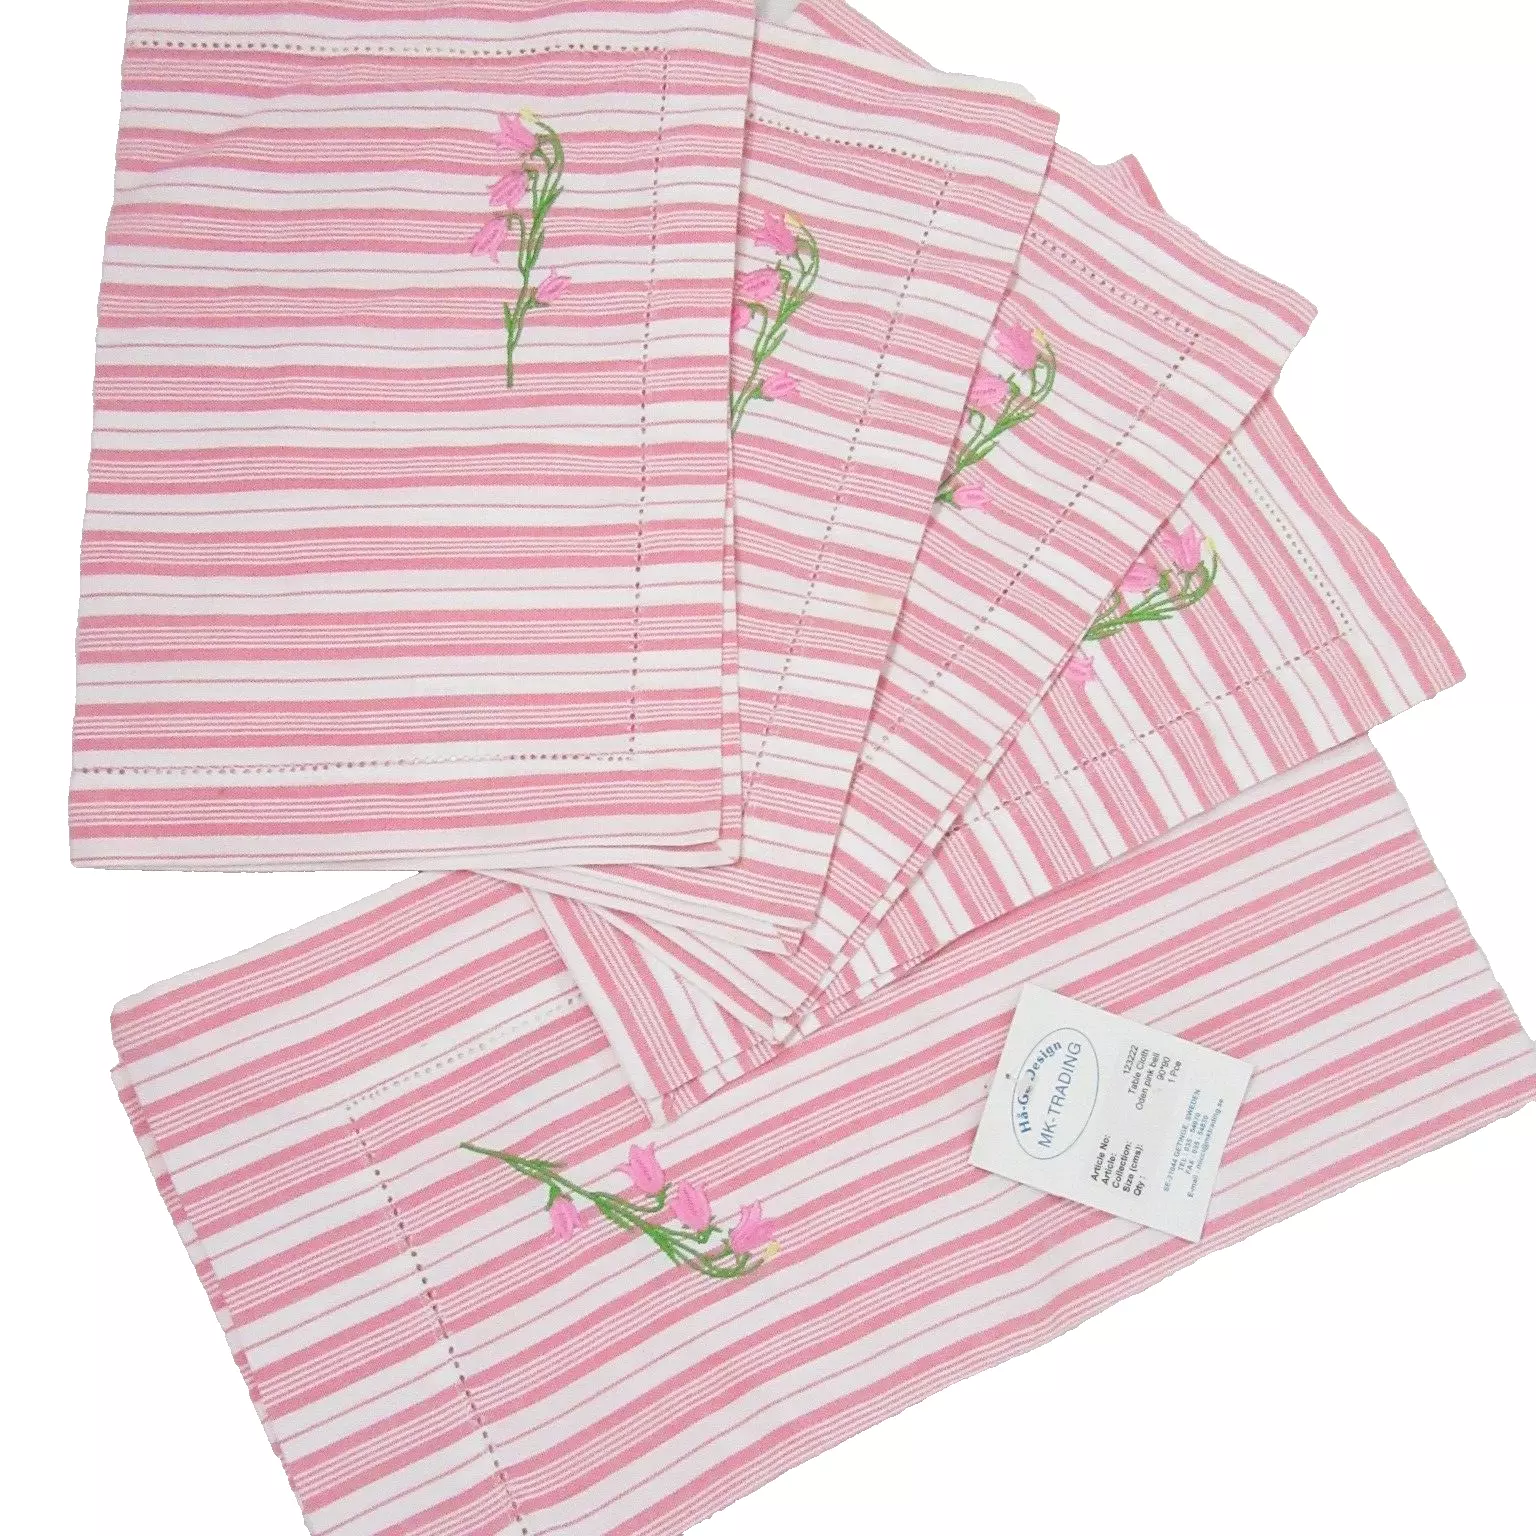 MK-Trading Embroidered Floral Stripe Pink 5-PC Fabric Tablecloth and Pla... - $45.00